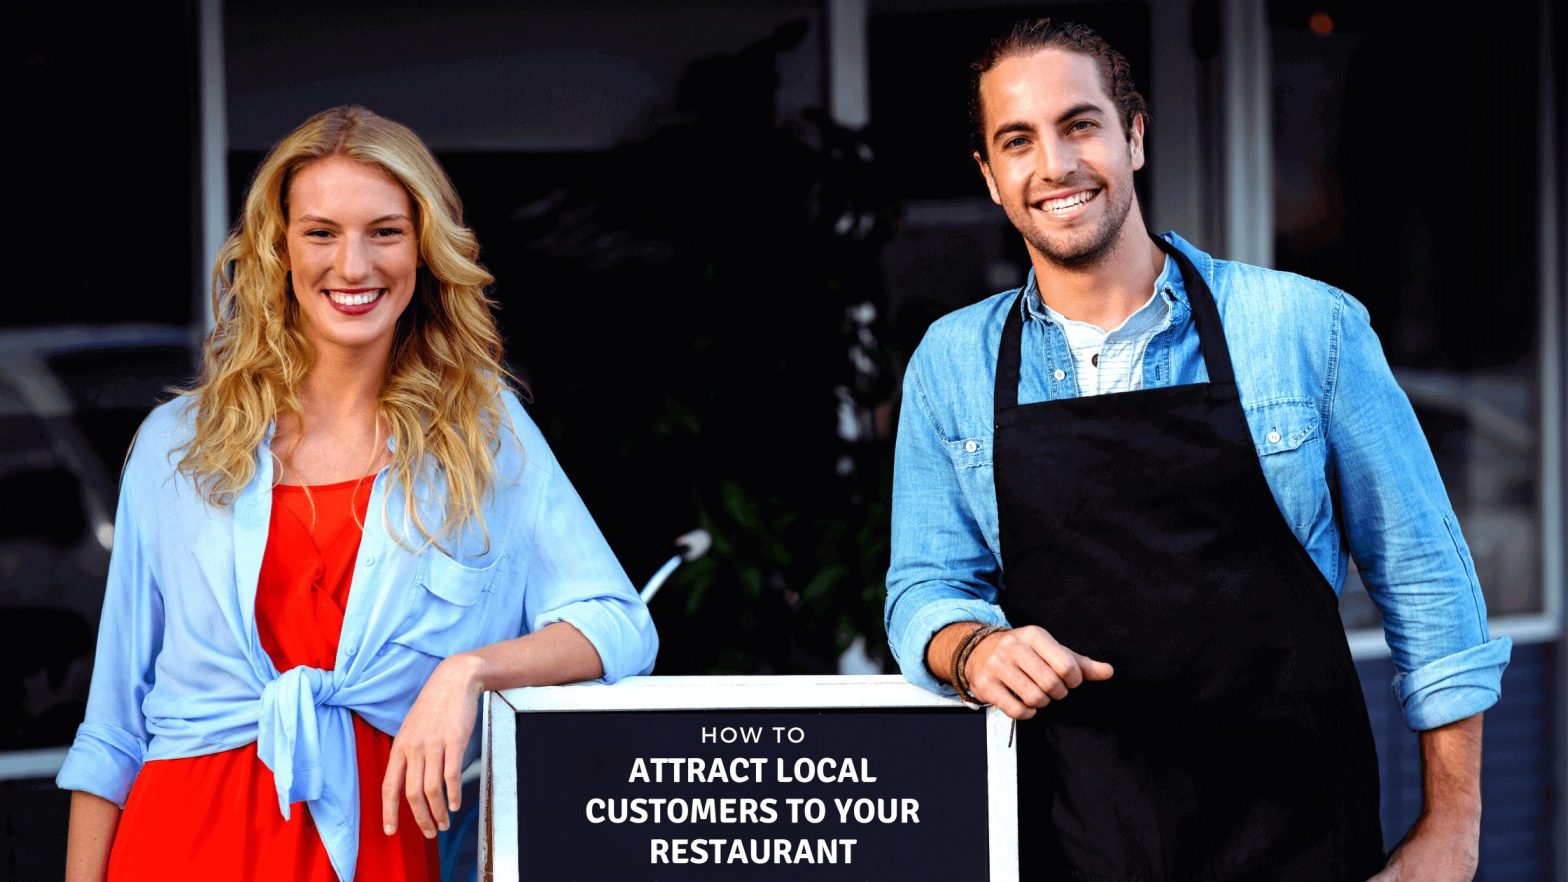 How to attract local customers to your restaurant